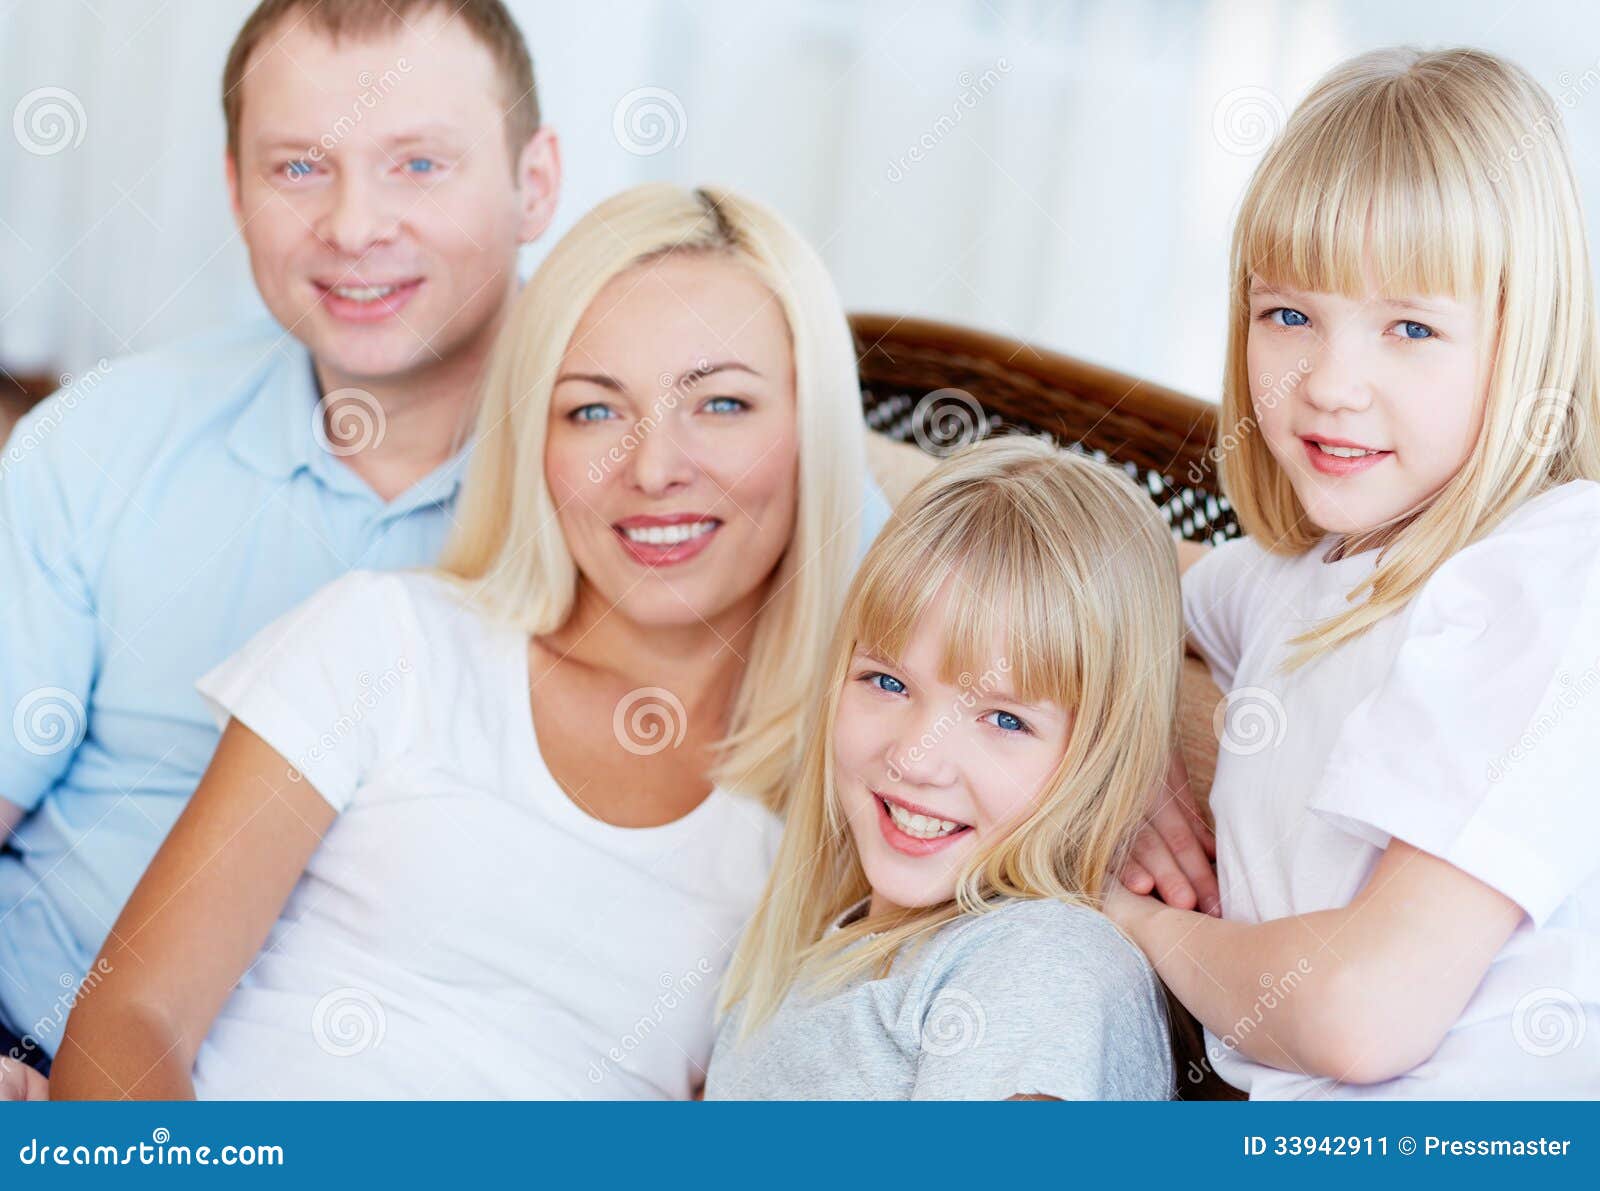 Twins And Their Parents Stock Im image